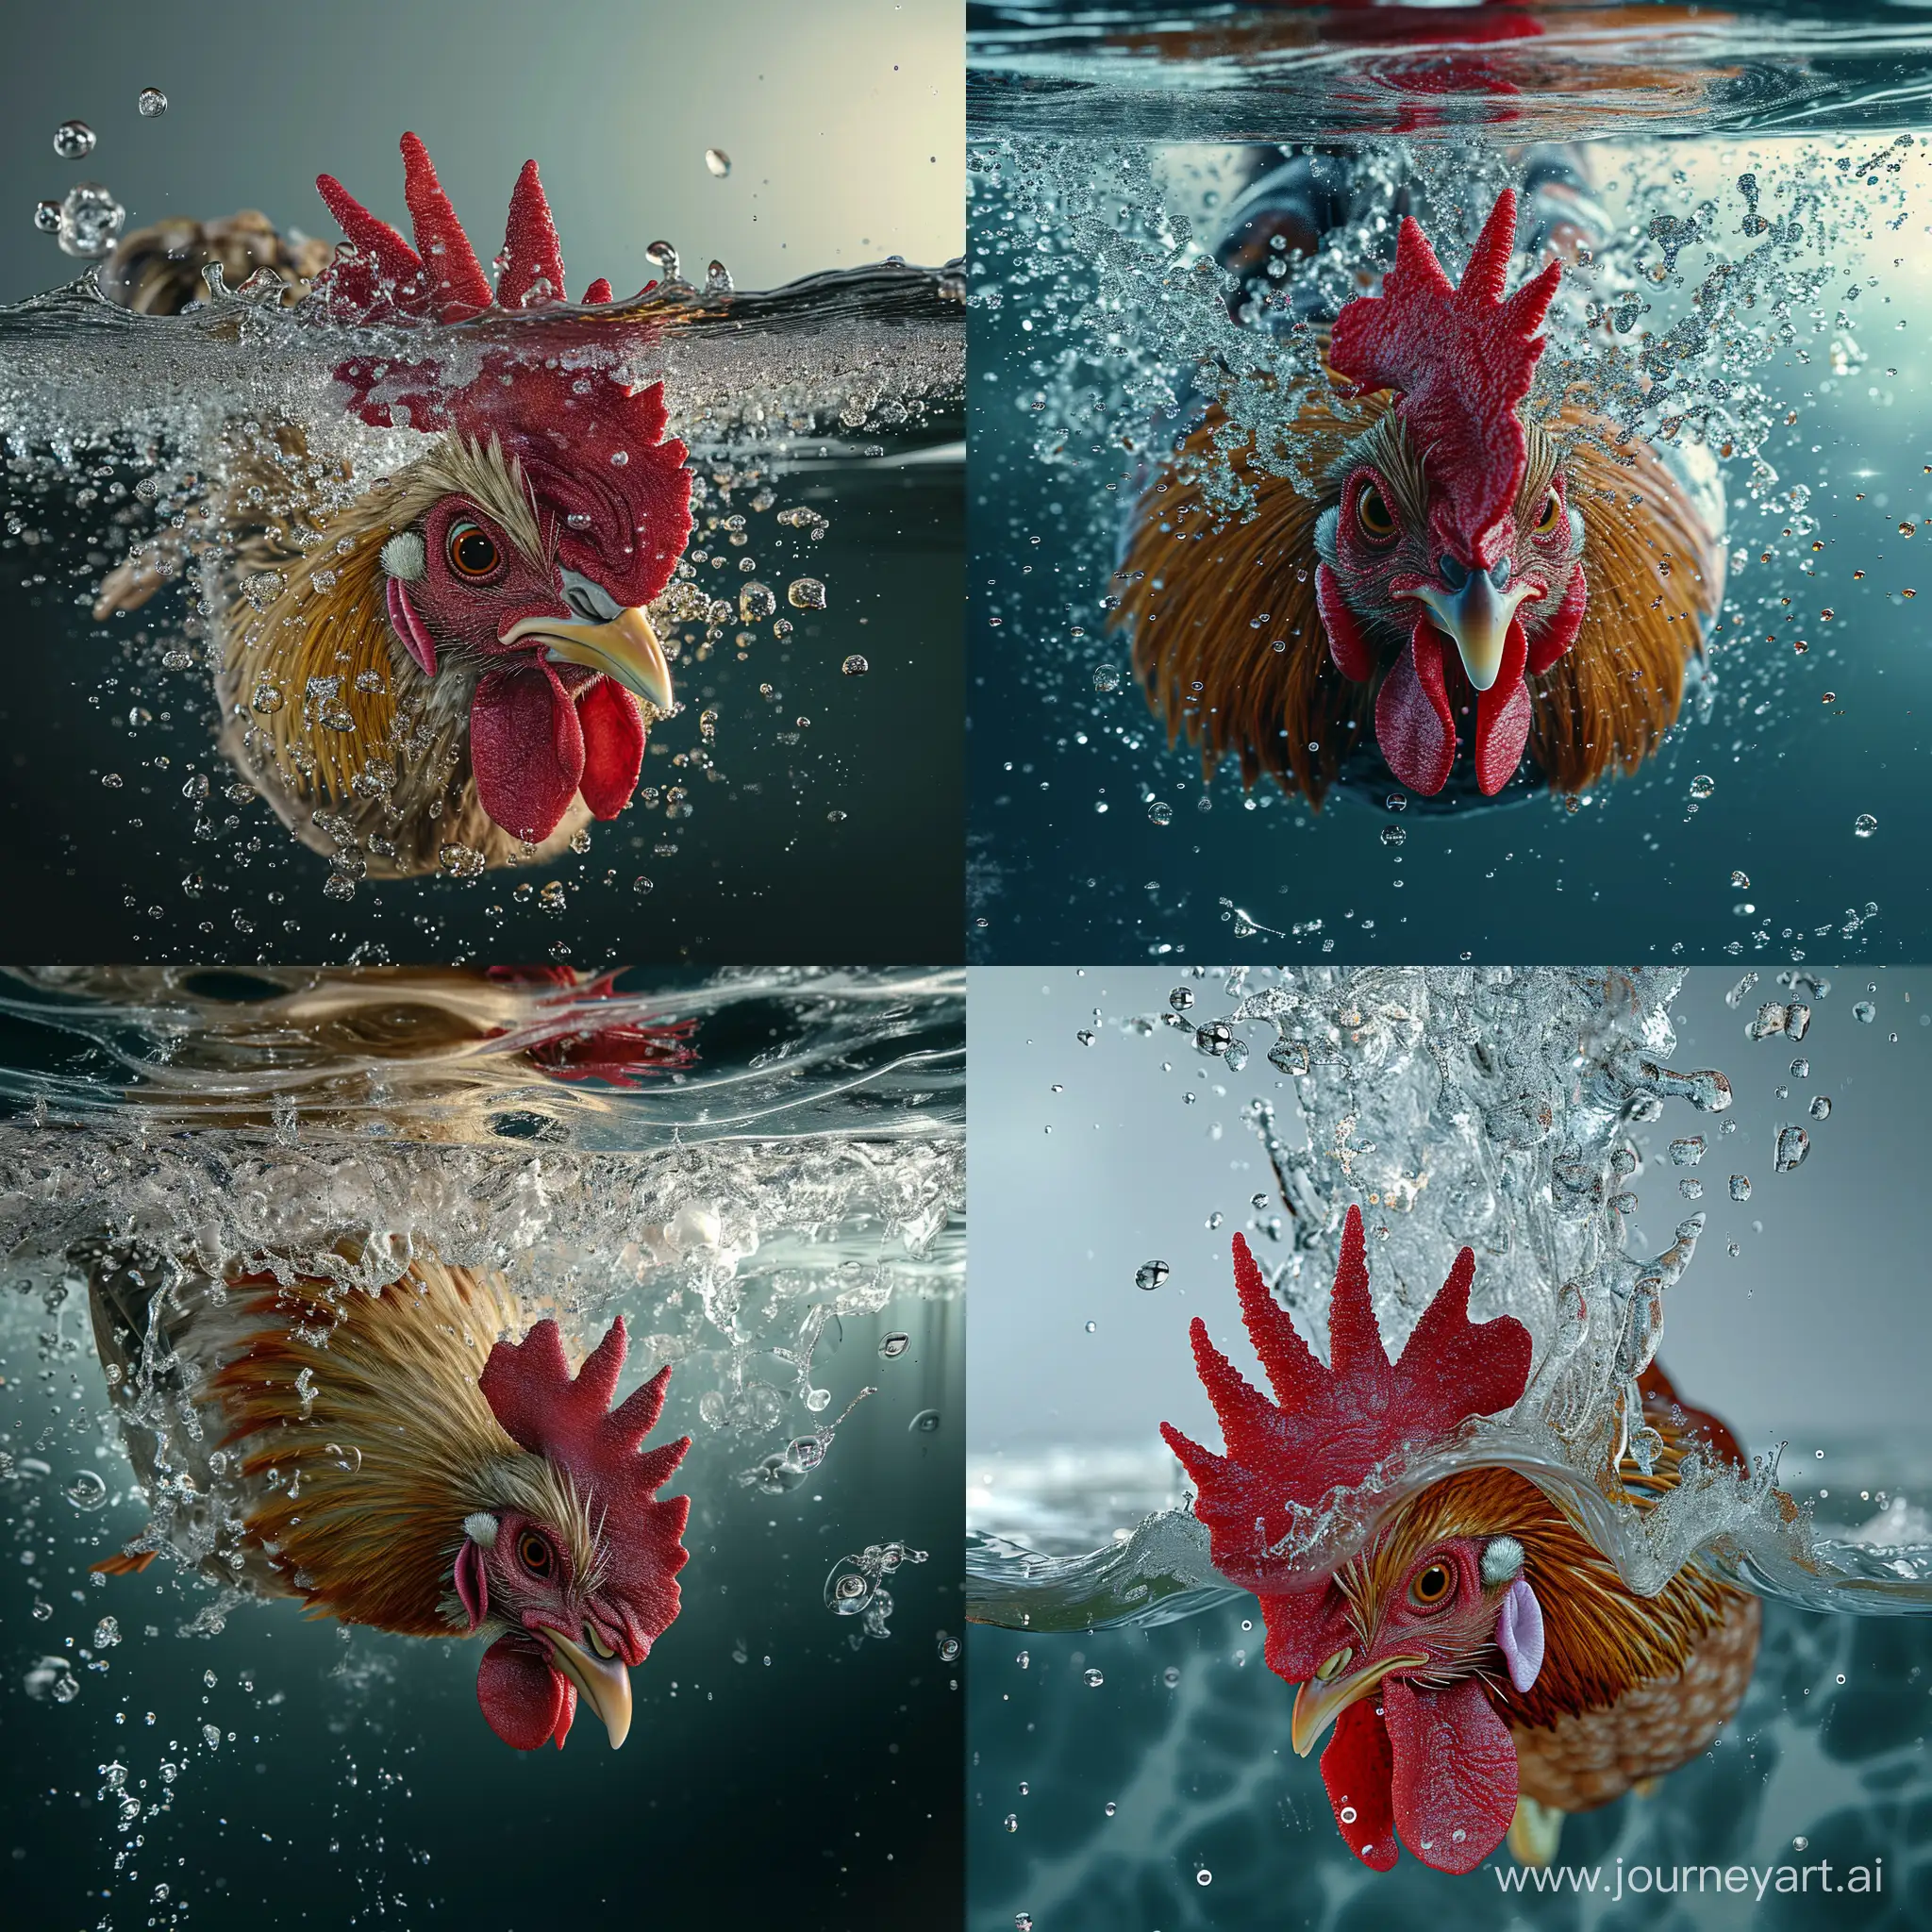 Rooster-Diving-Into-Water-with-HyperMaximalist-Photorealism